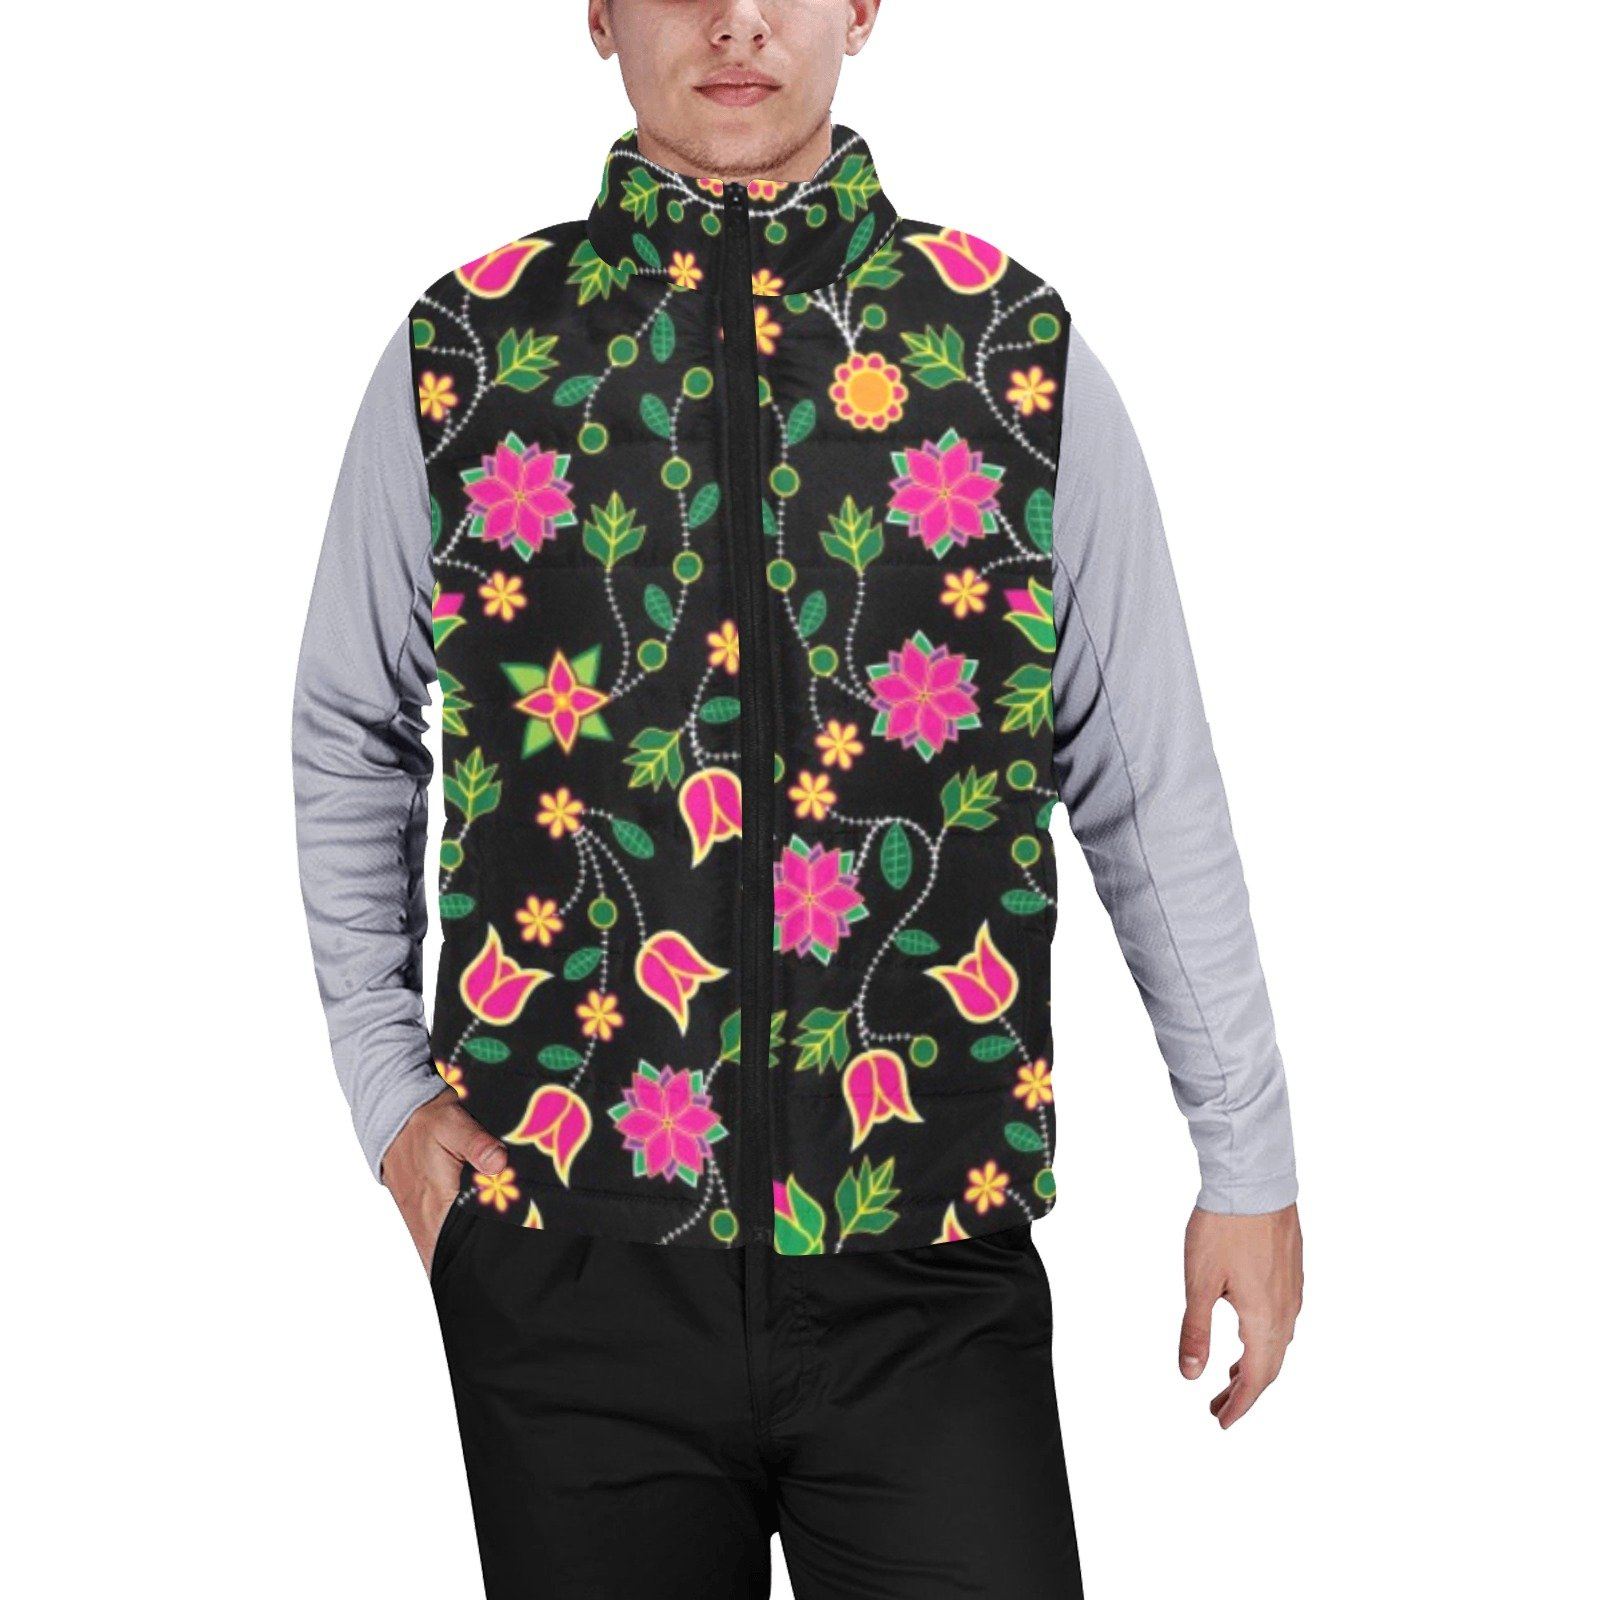 Floral Bearpaw Pink and Yellow Men's Padded Vest Jacket (Model H44) Men's Padded Vest Jacket (H44) e-joyer 